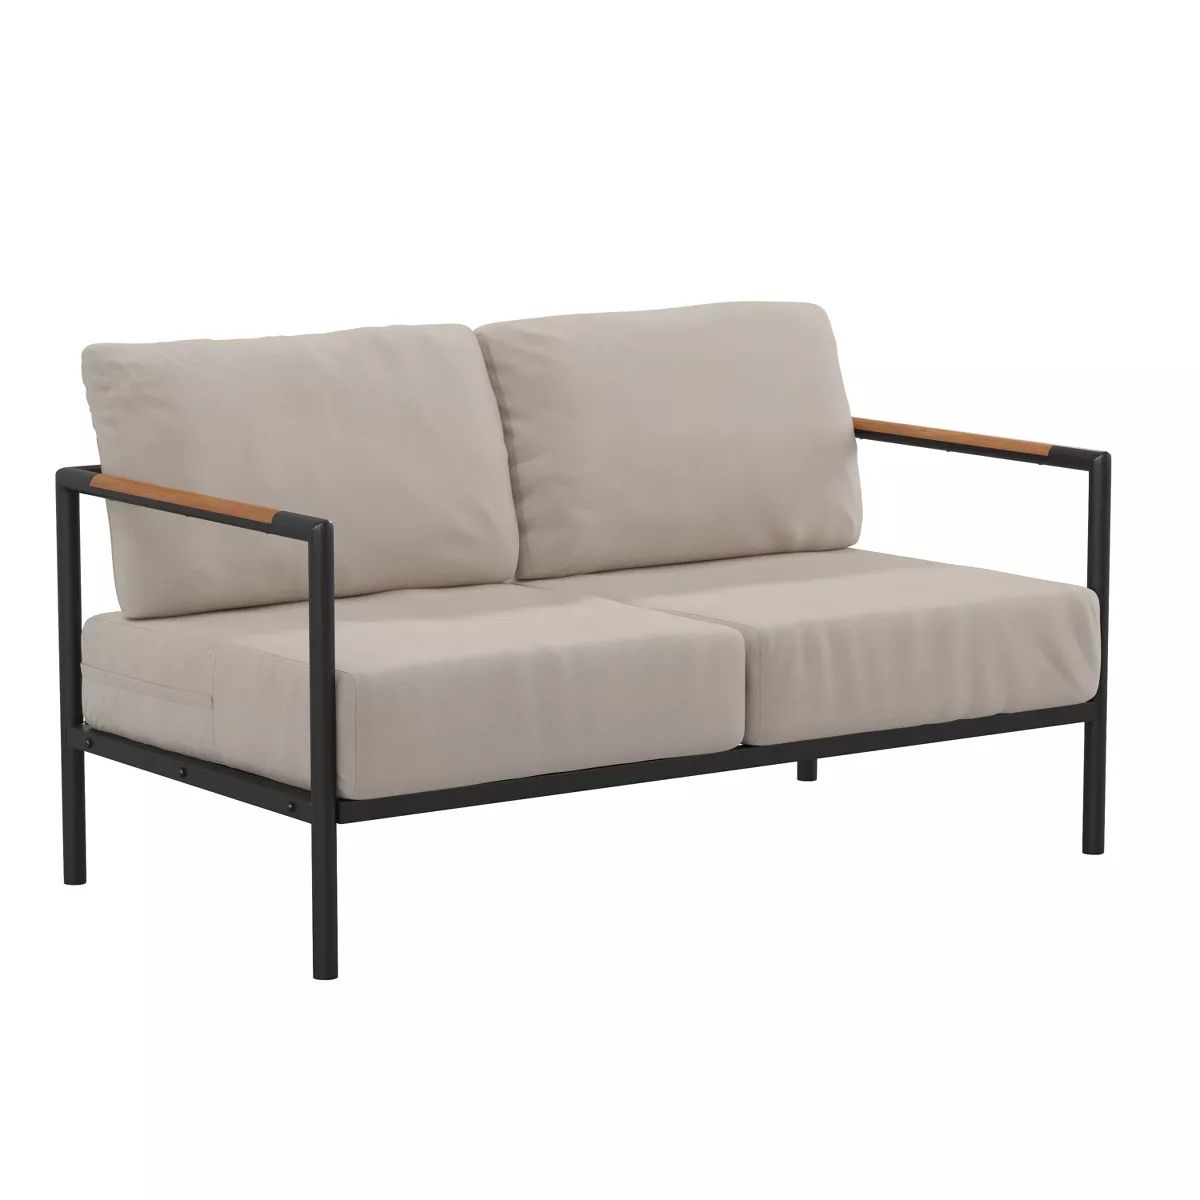 Emma and Oliver Aluminum Frame Loveseat with Teak Arm Accents and Plush Cushions | Target